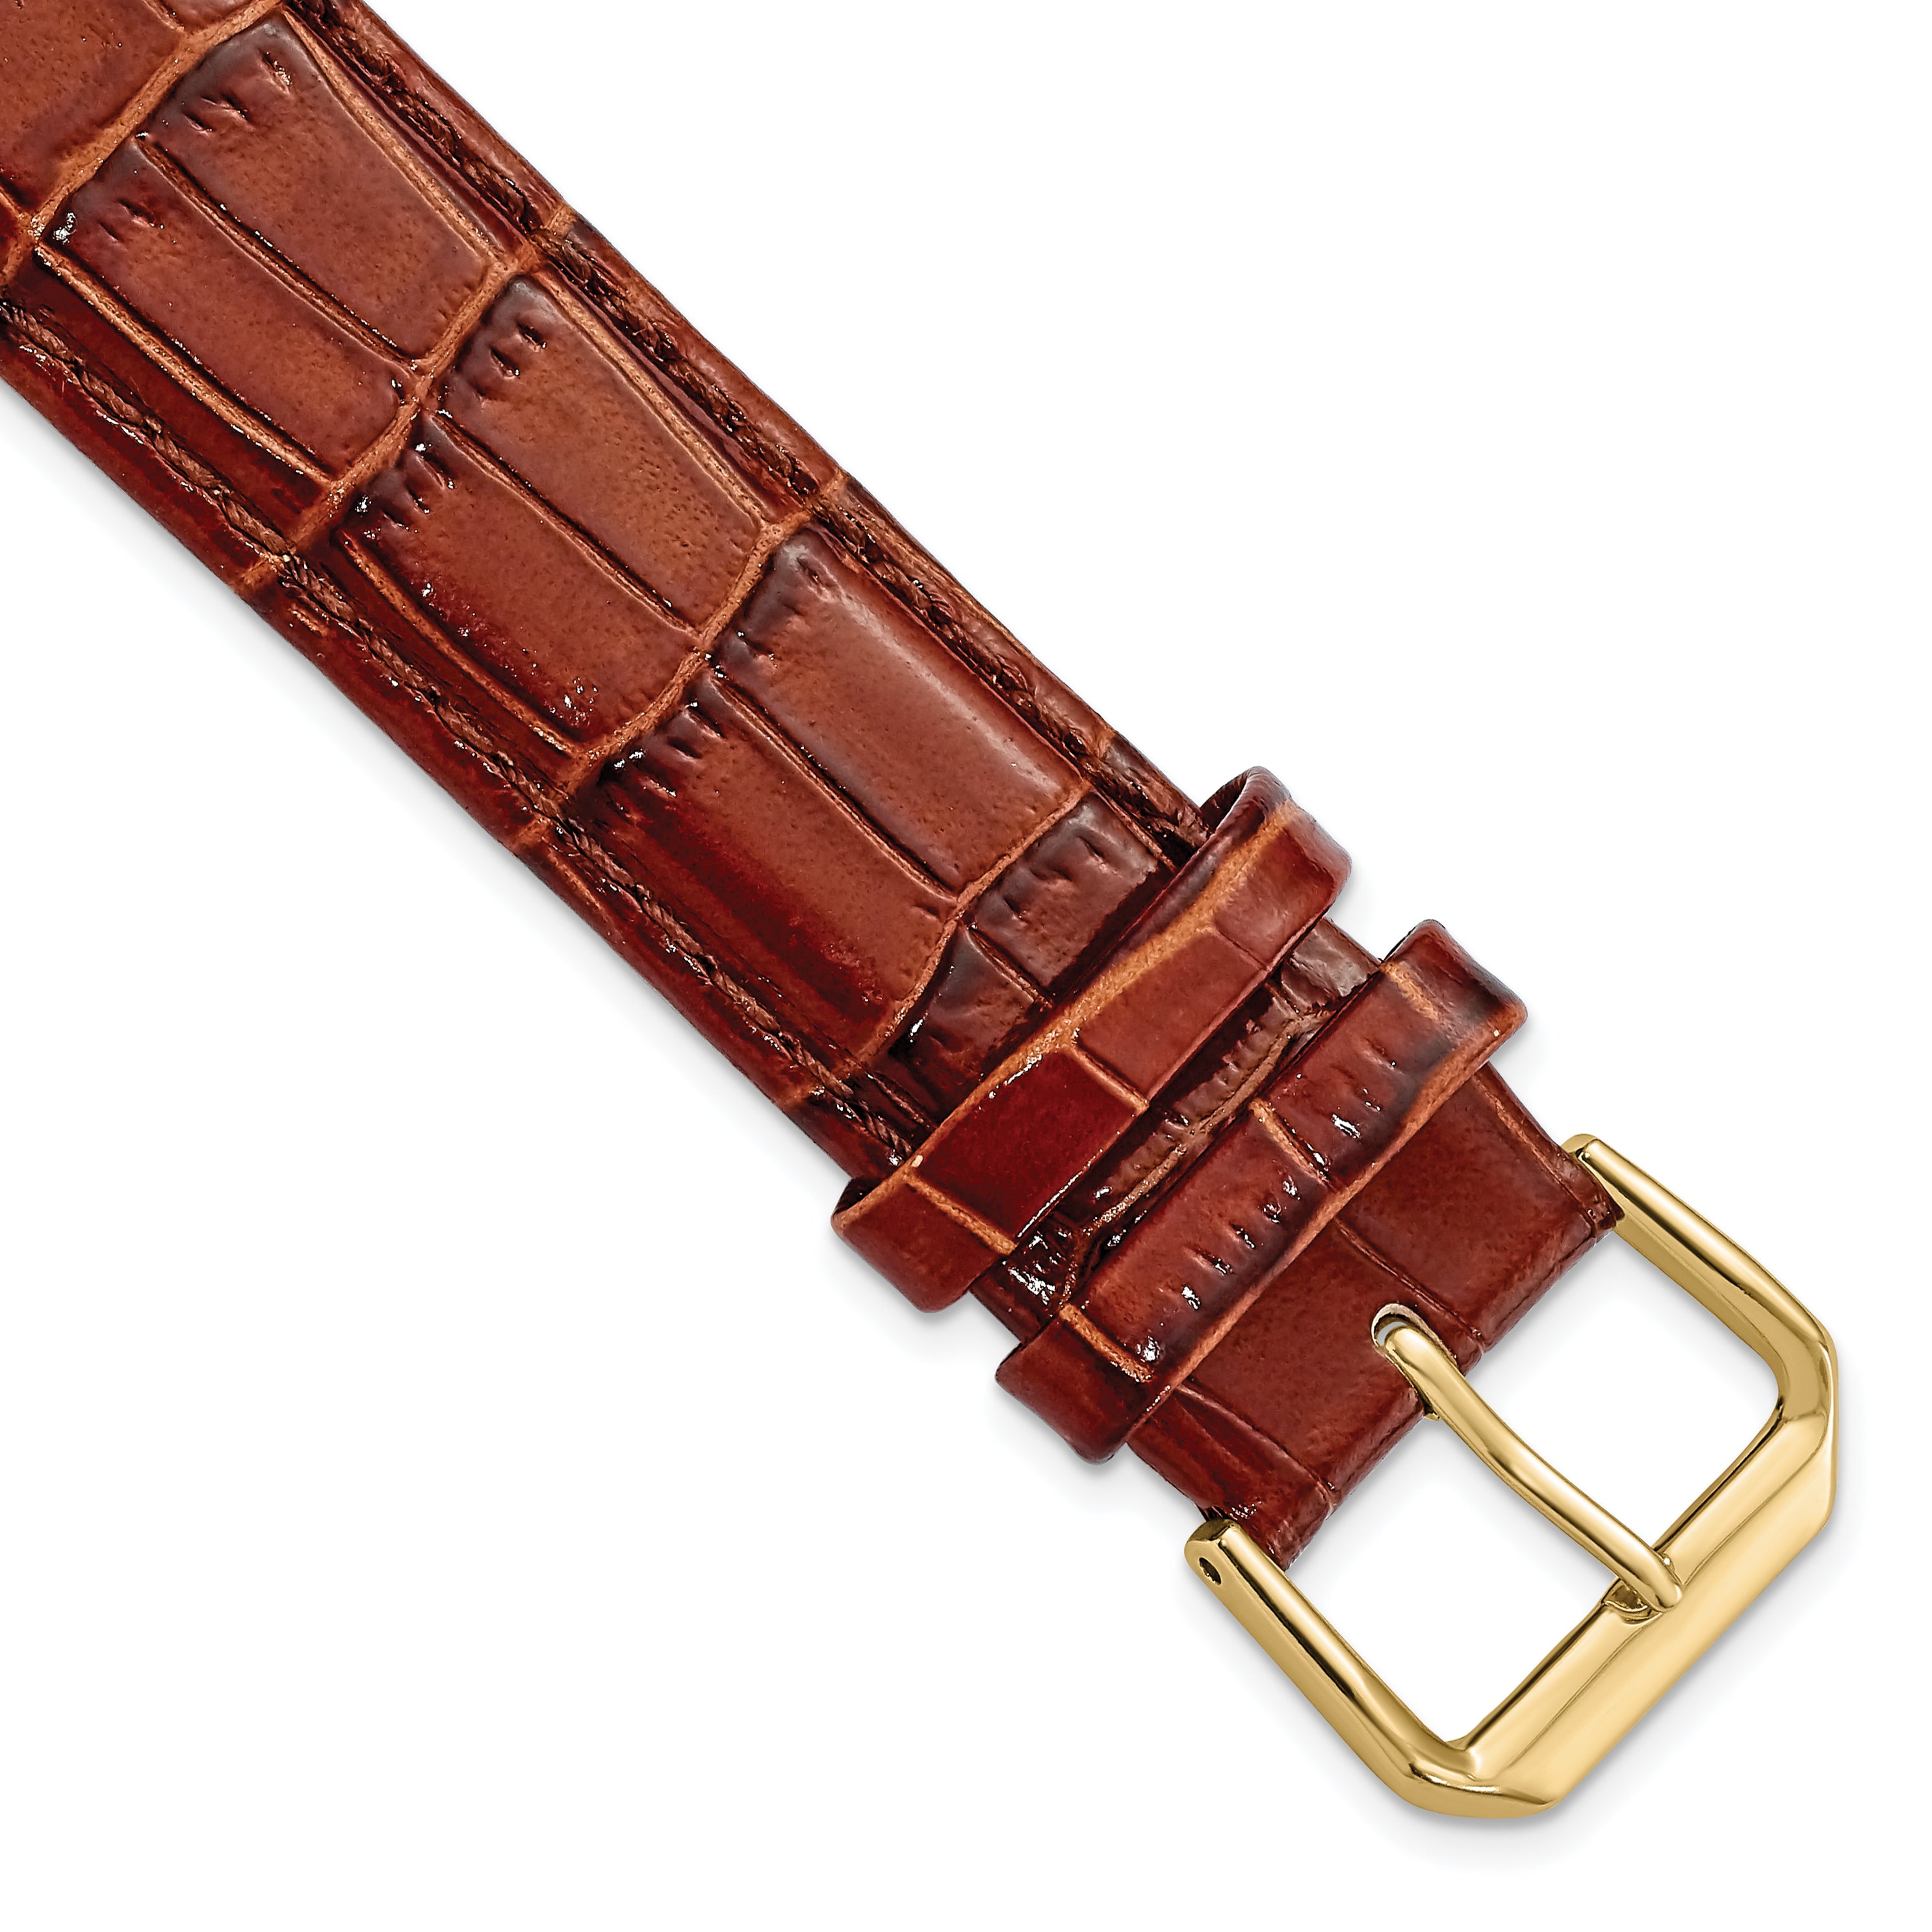 DeBeer 19mm Havana Crocodile Grain Leather with Dark Stitching and Gold-tone Buckle 7.5 inch Watch Band